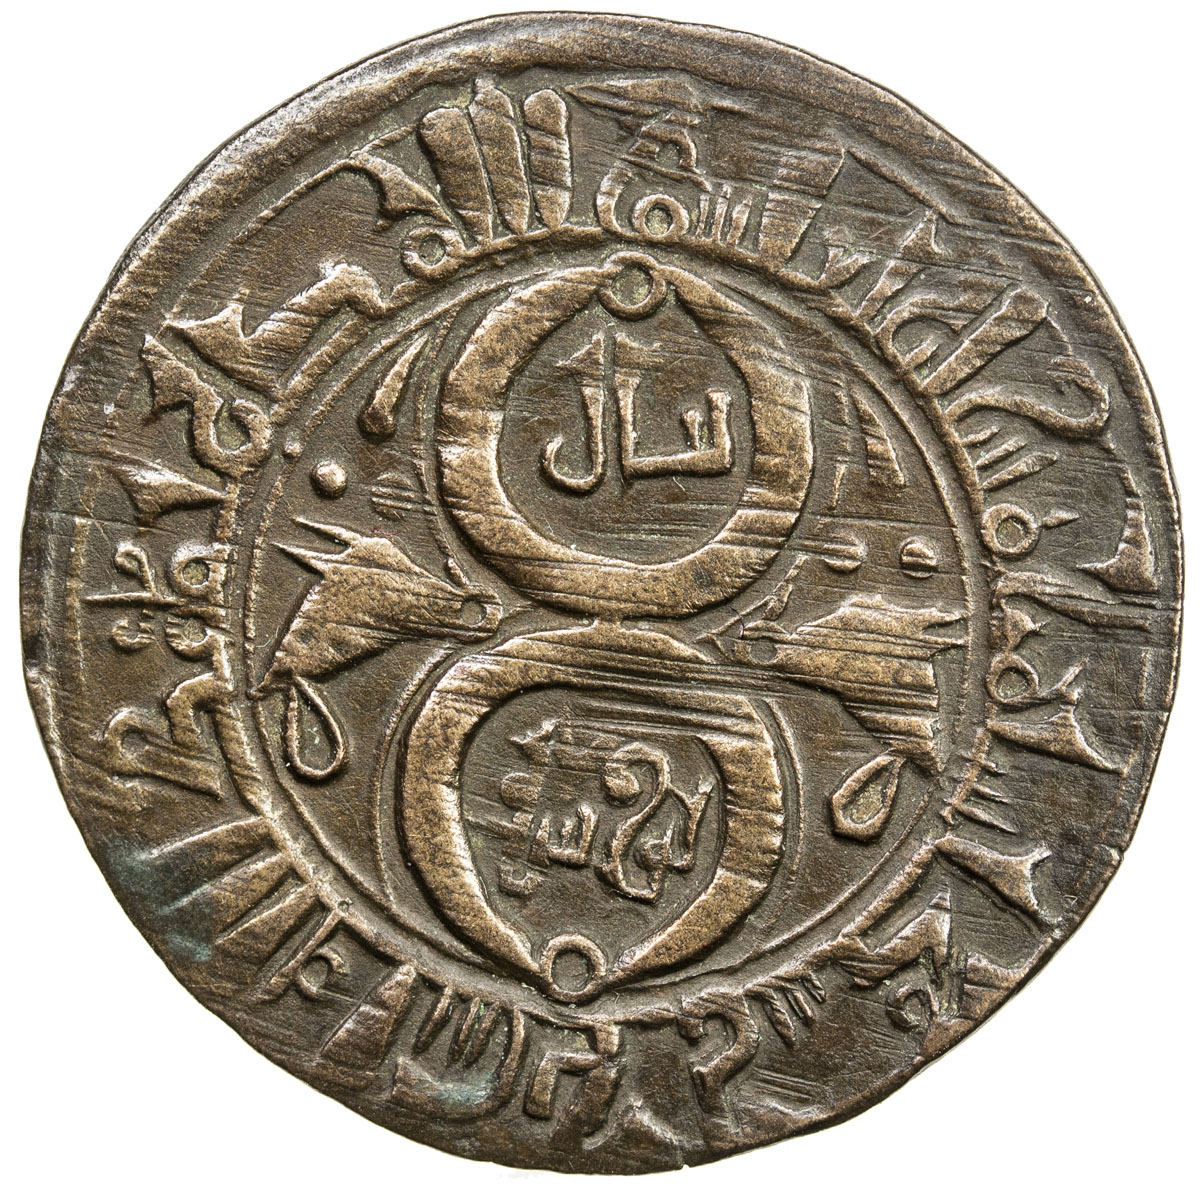 Stephen Album Rare Coins - Specialists in Islamic, Indian, and